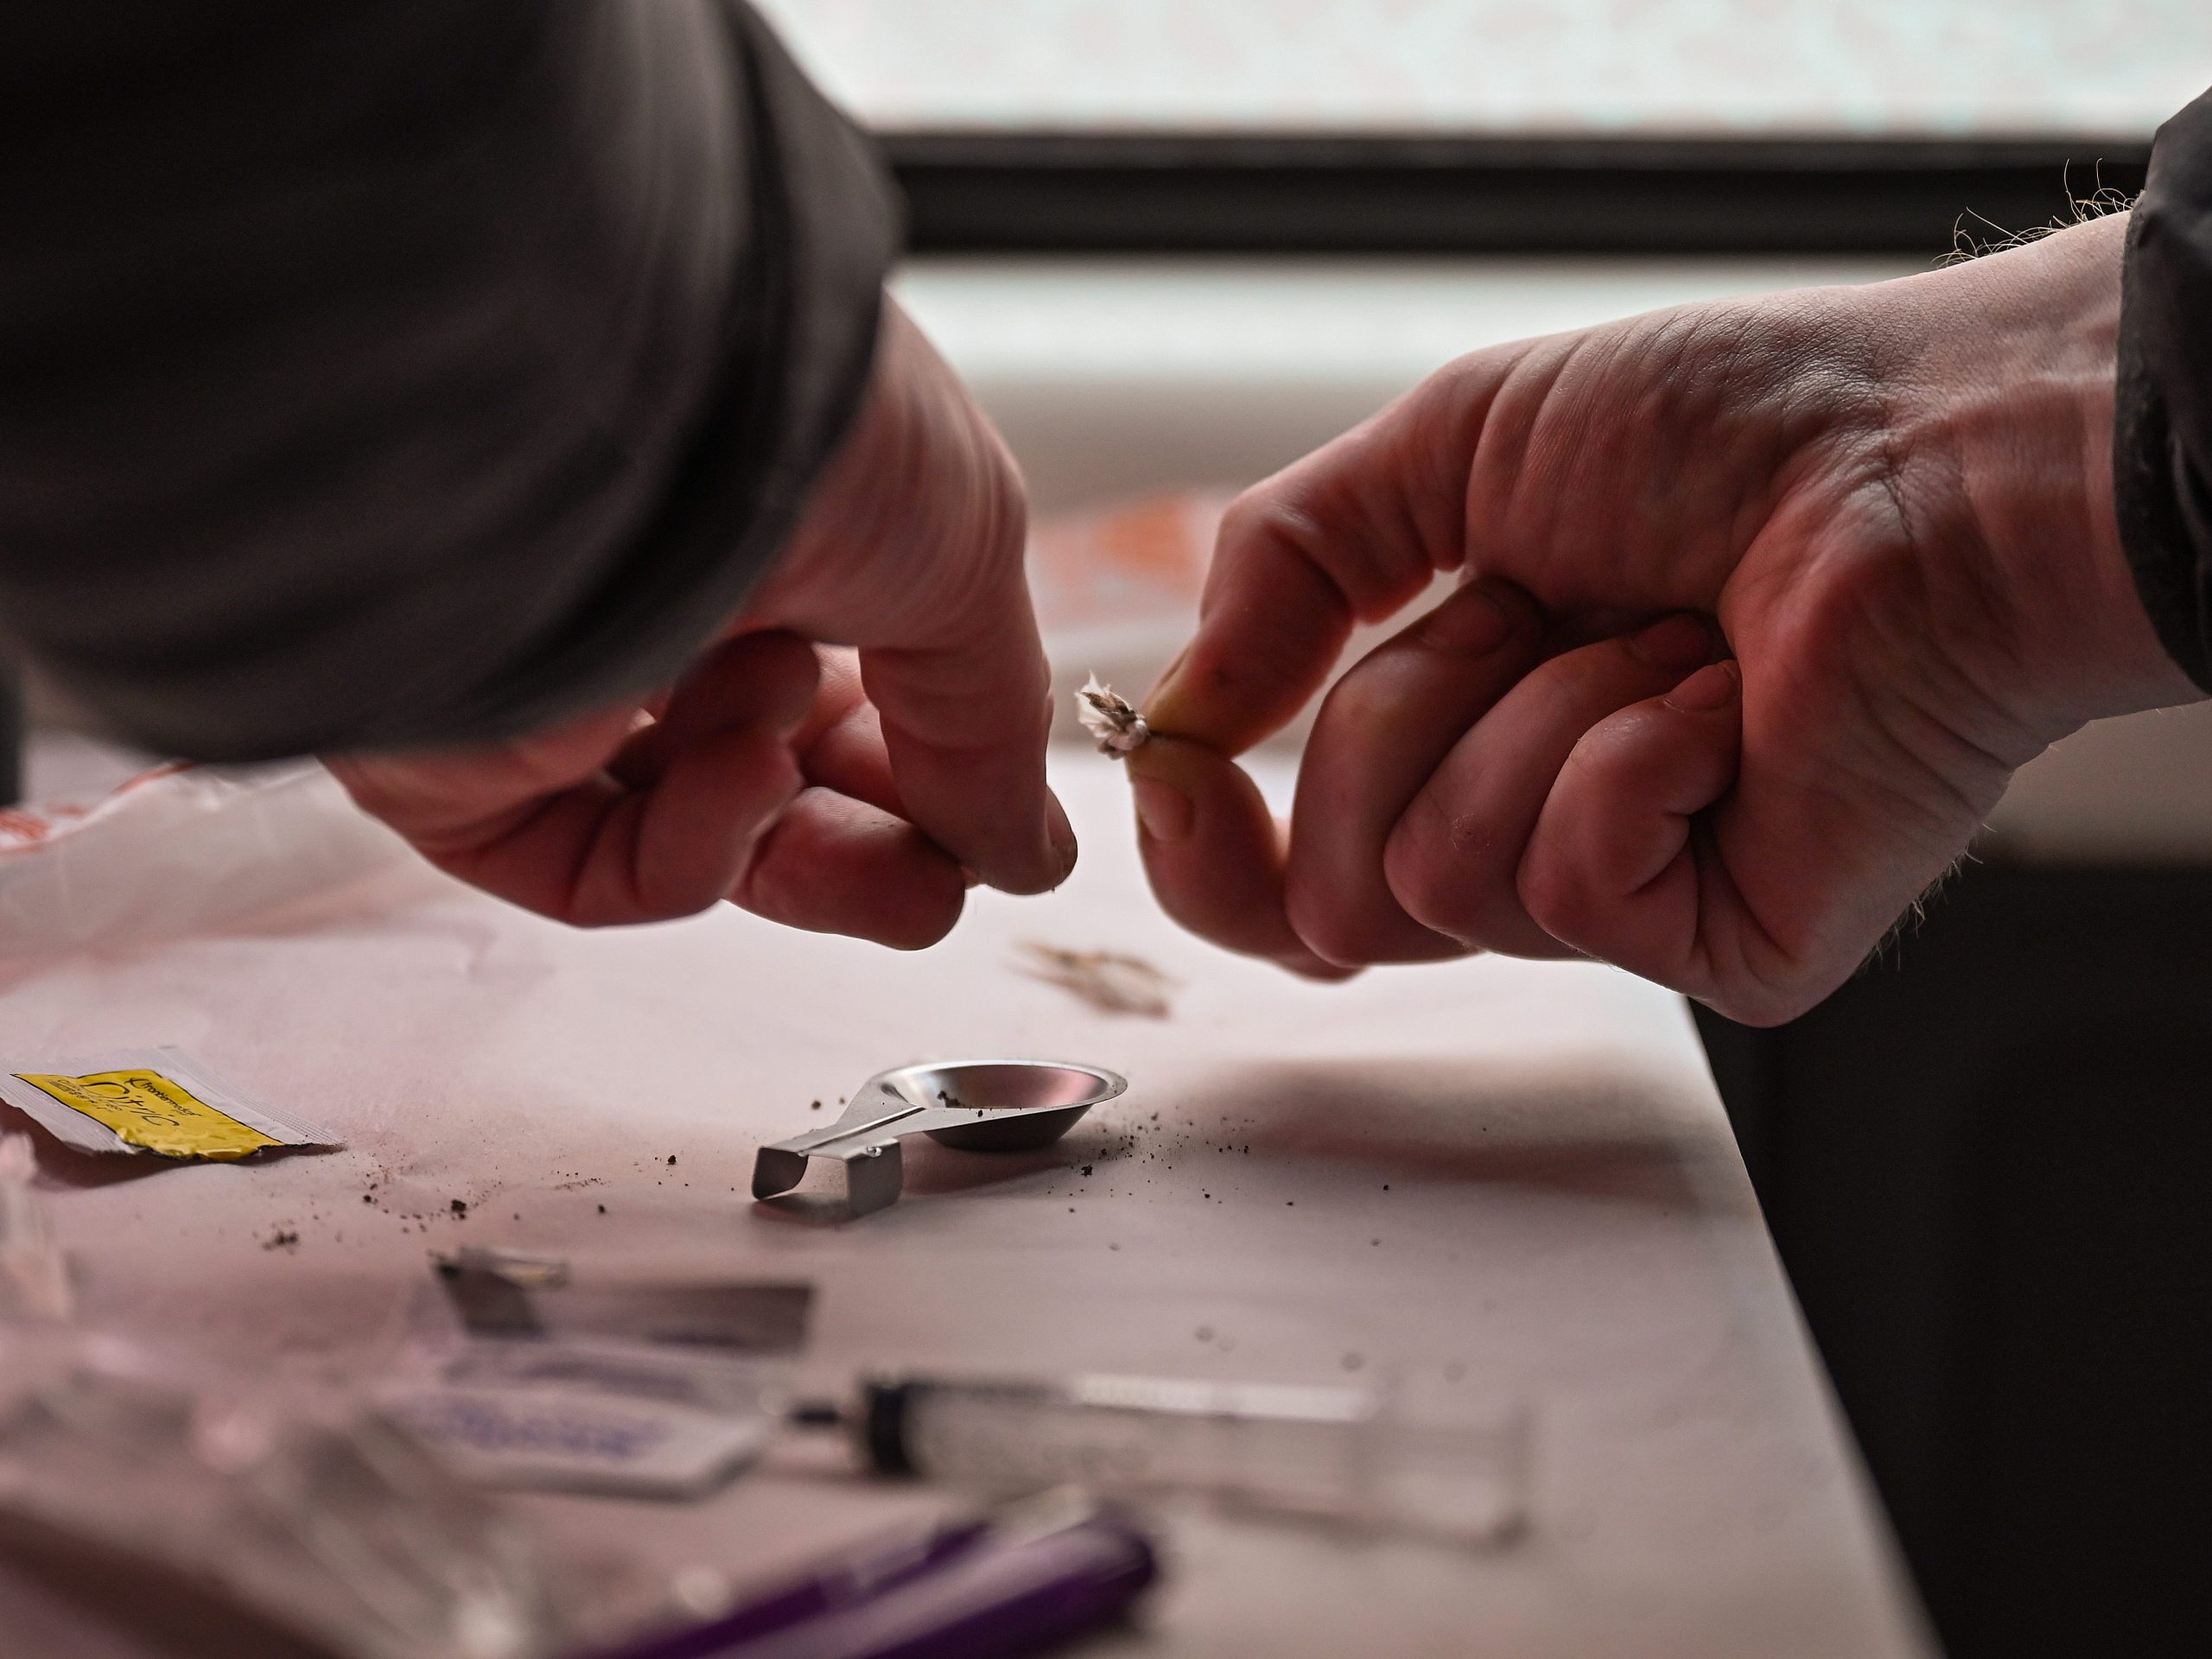 A drug user prepares heroin before injecting inside of a Safe Consumption van on September 25, 2020 in Glasgow, Scotland.